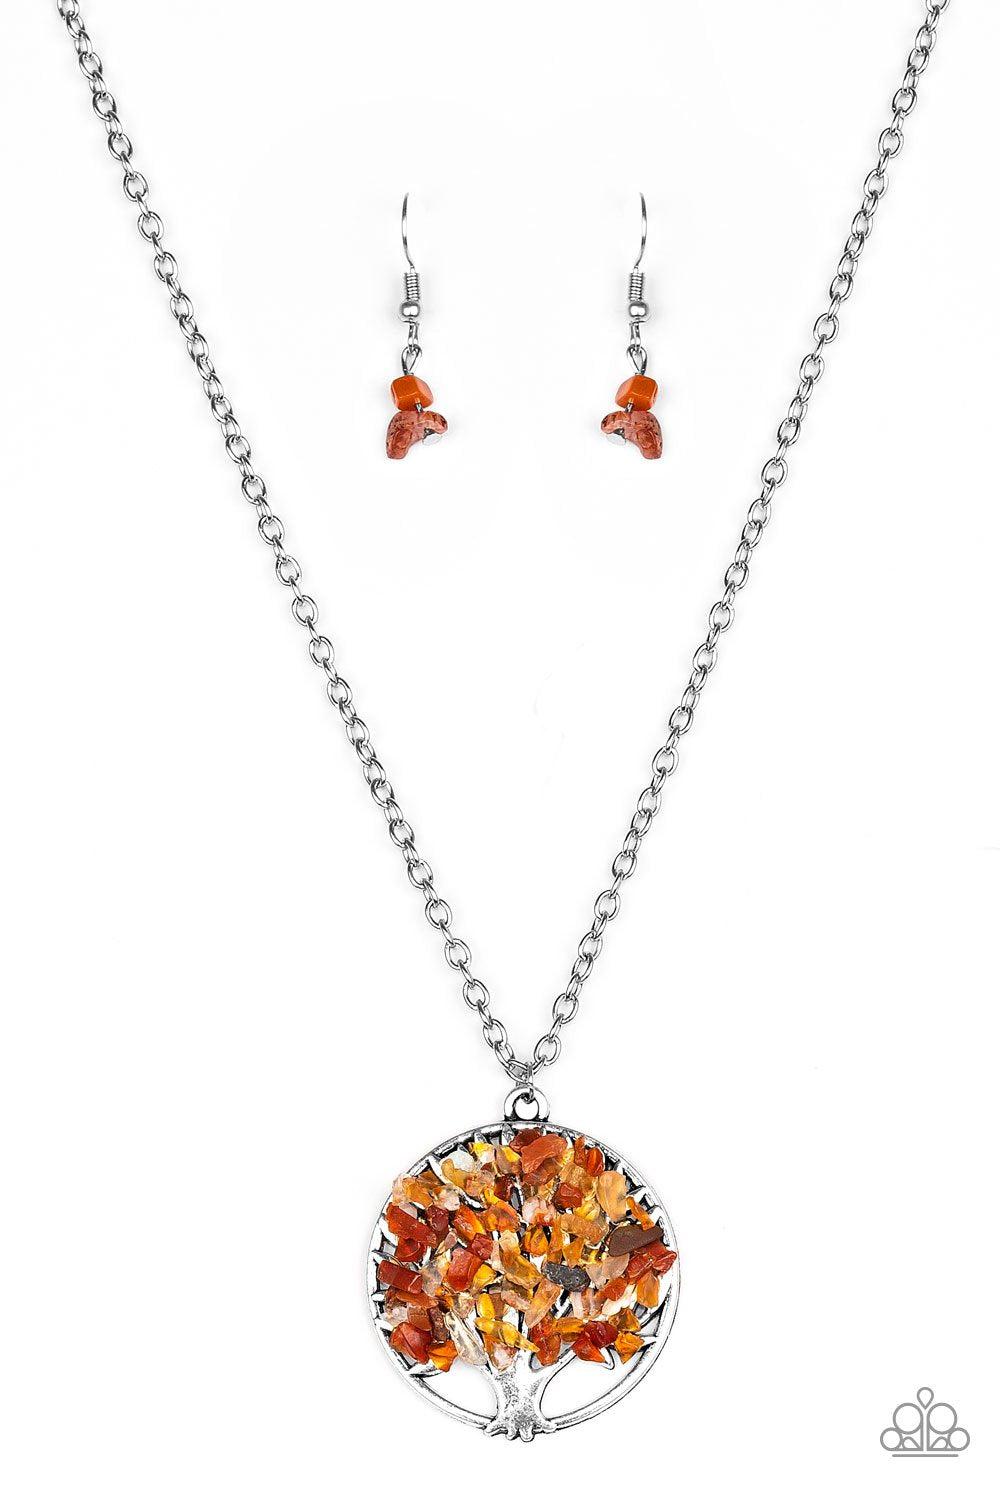 Naturally Nirvana Orange Stone Necklace and matching Earrings - Paparazzi Accessories-CarasShop.com - $5 Jewelry by Cara Jewels